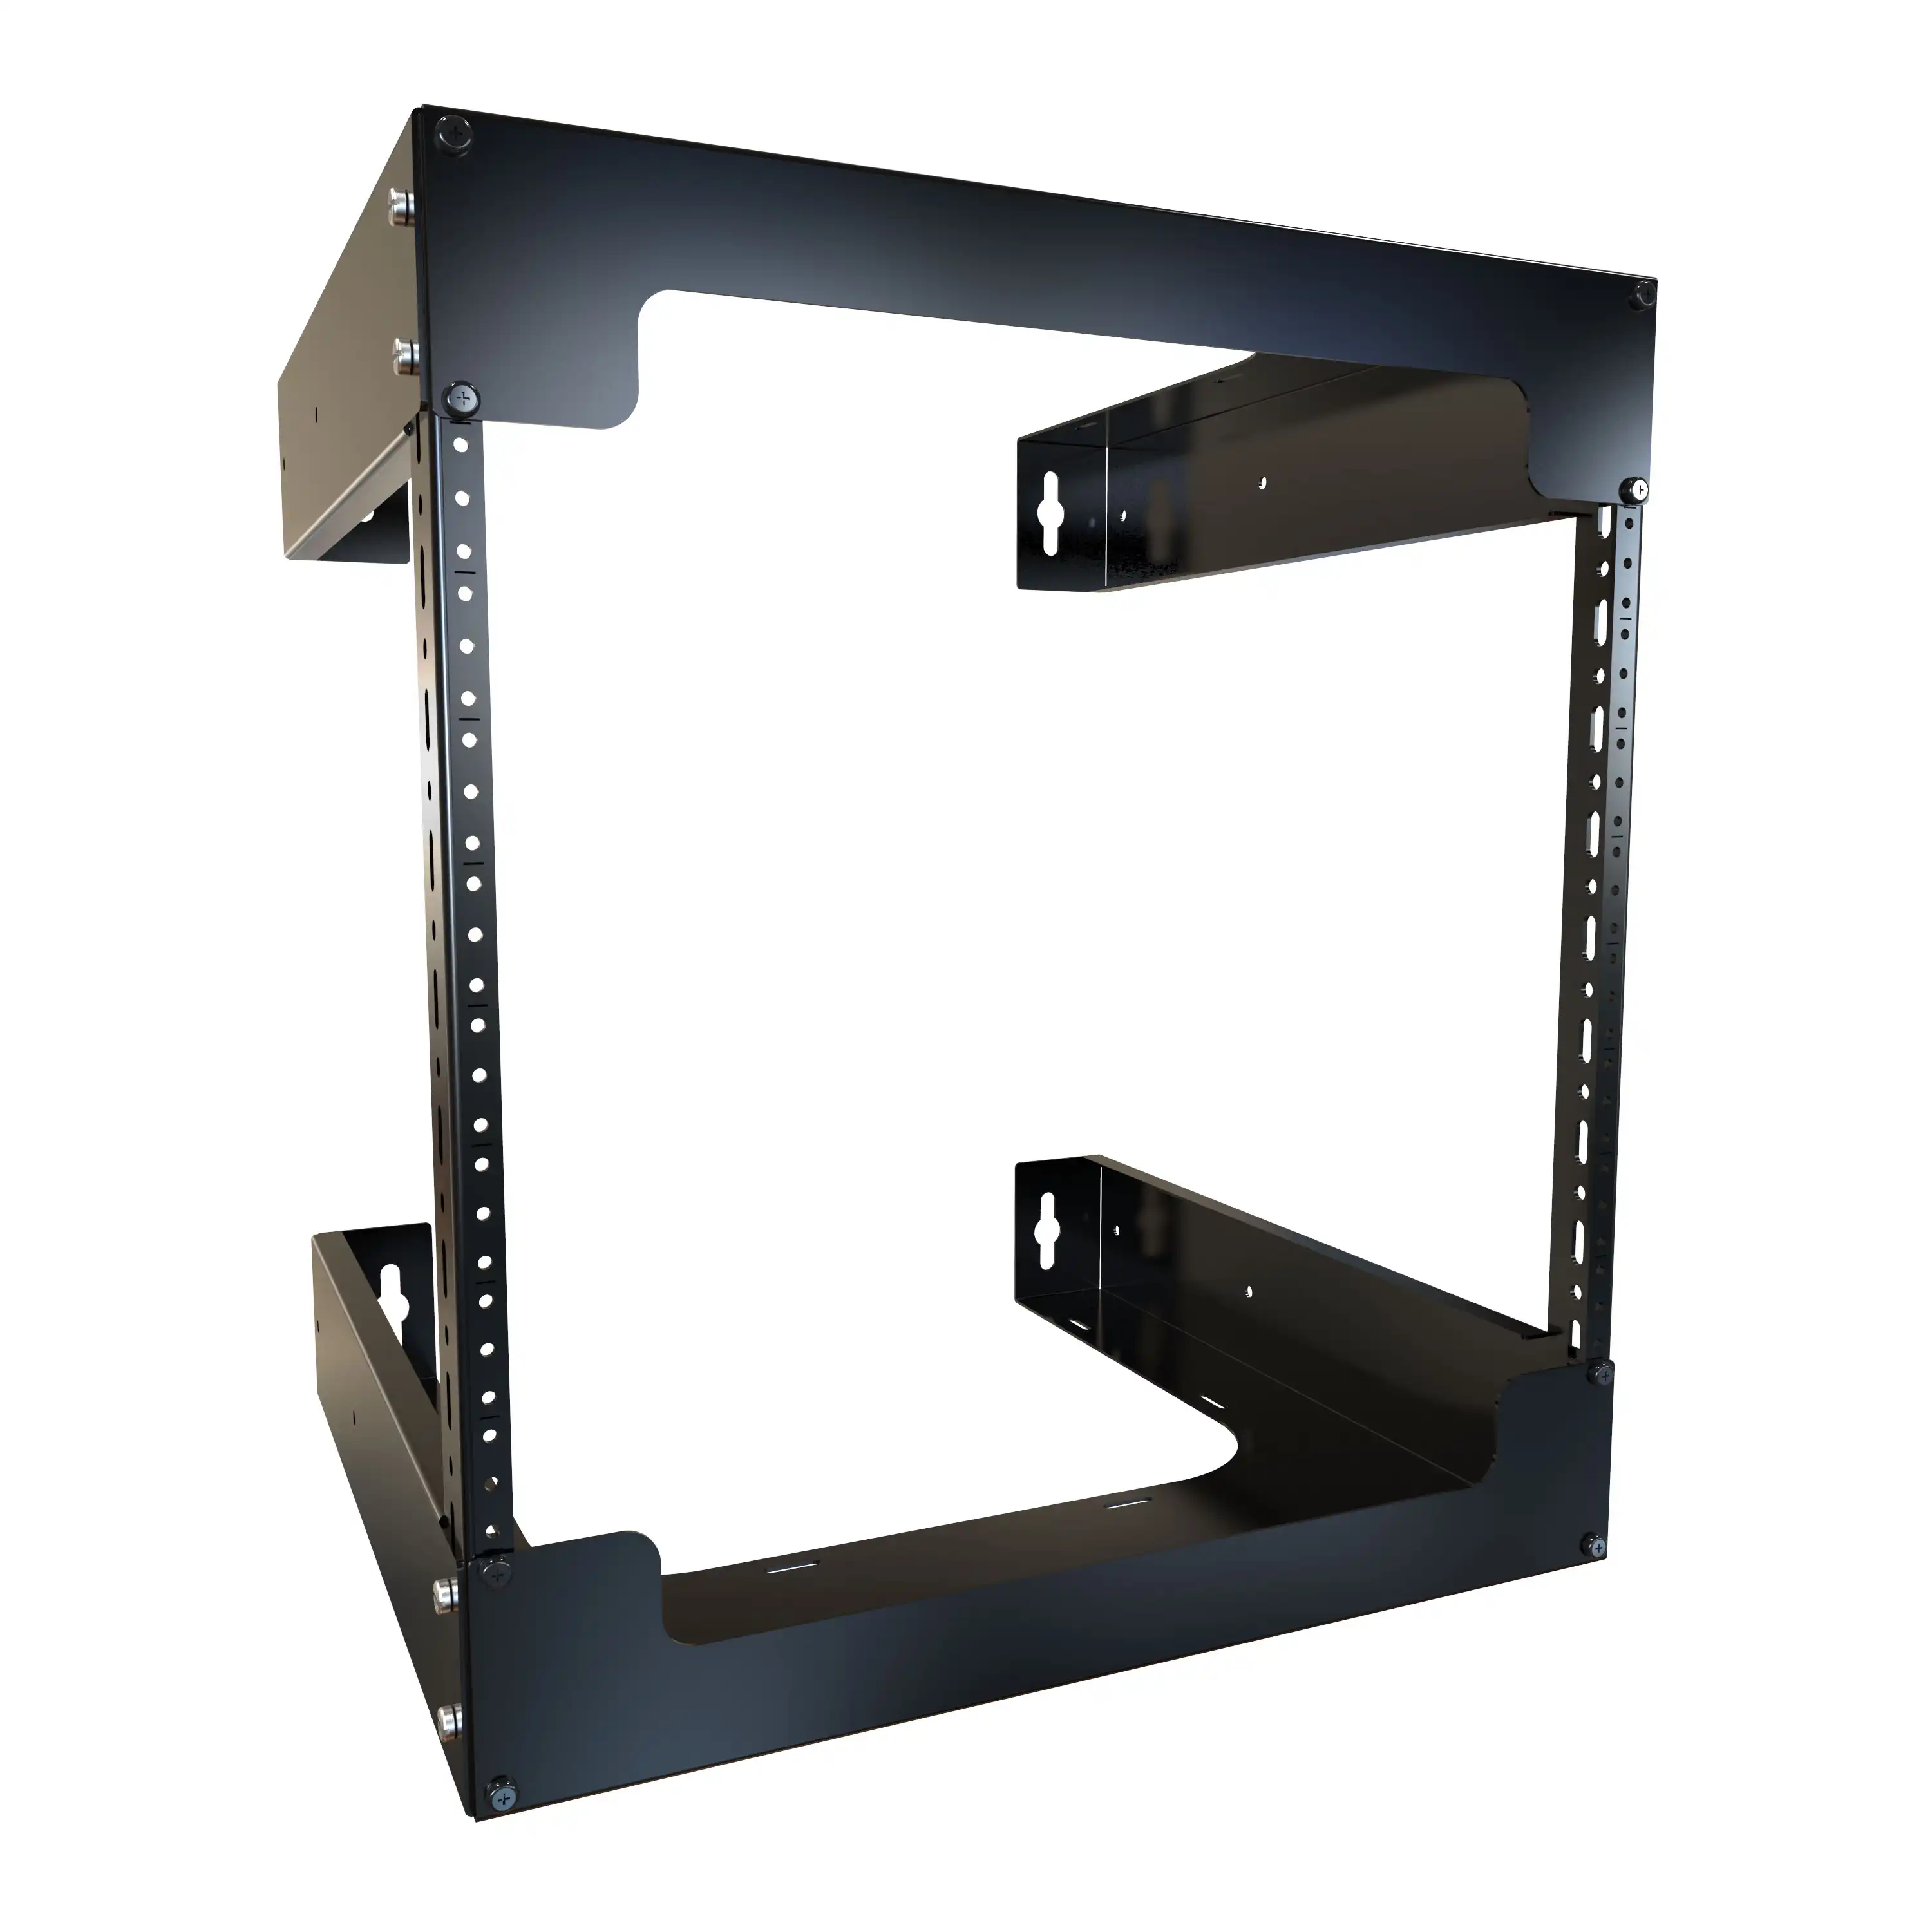 RB-2PW Series - Hammond Manufacturing Rack Systems - KGA Enclosures Ltd